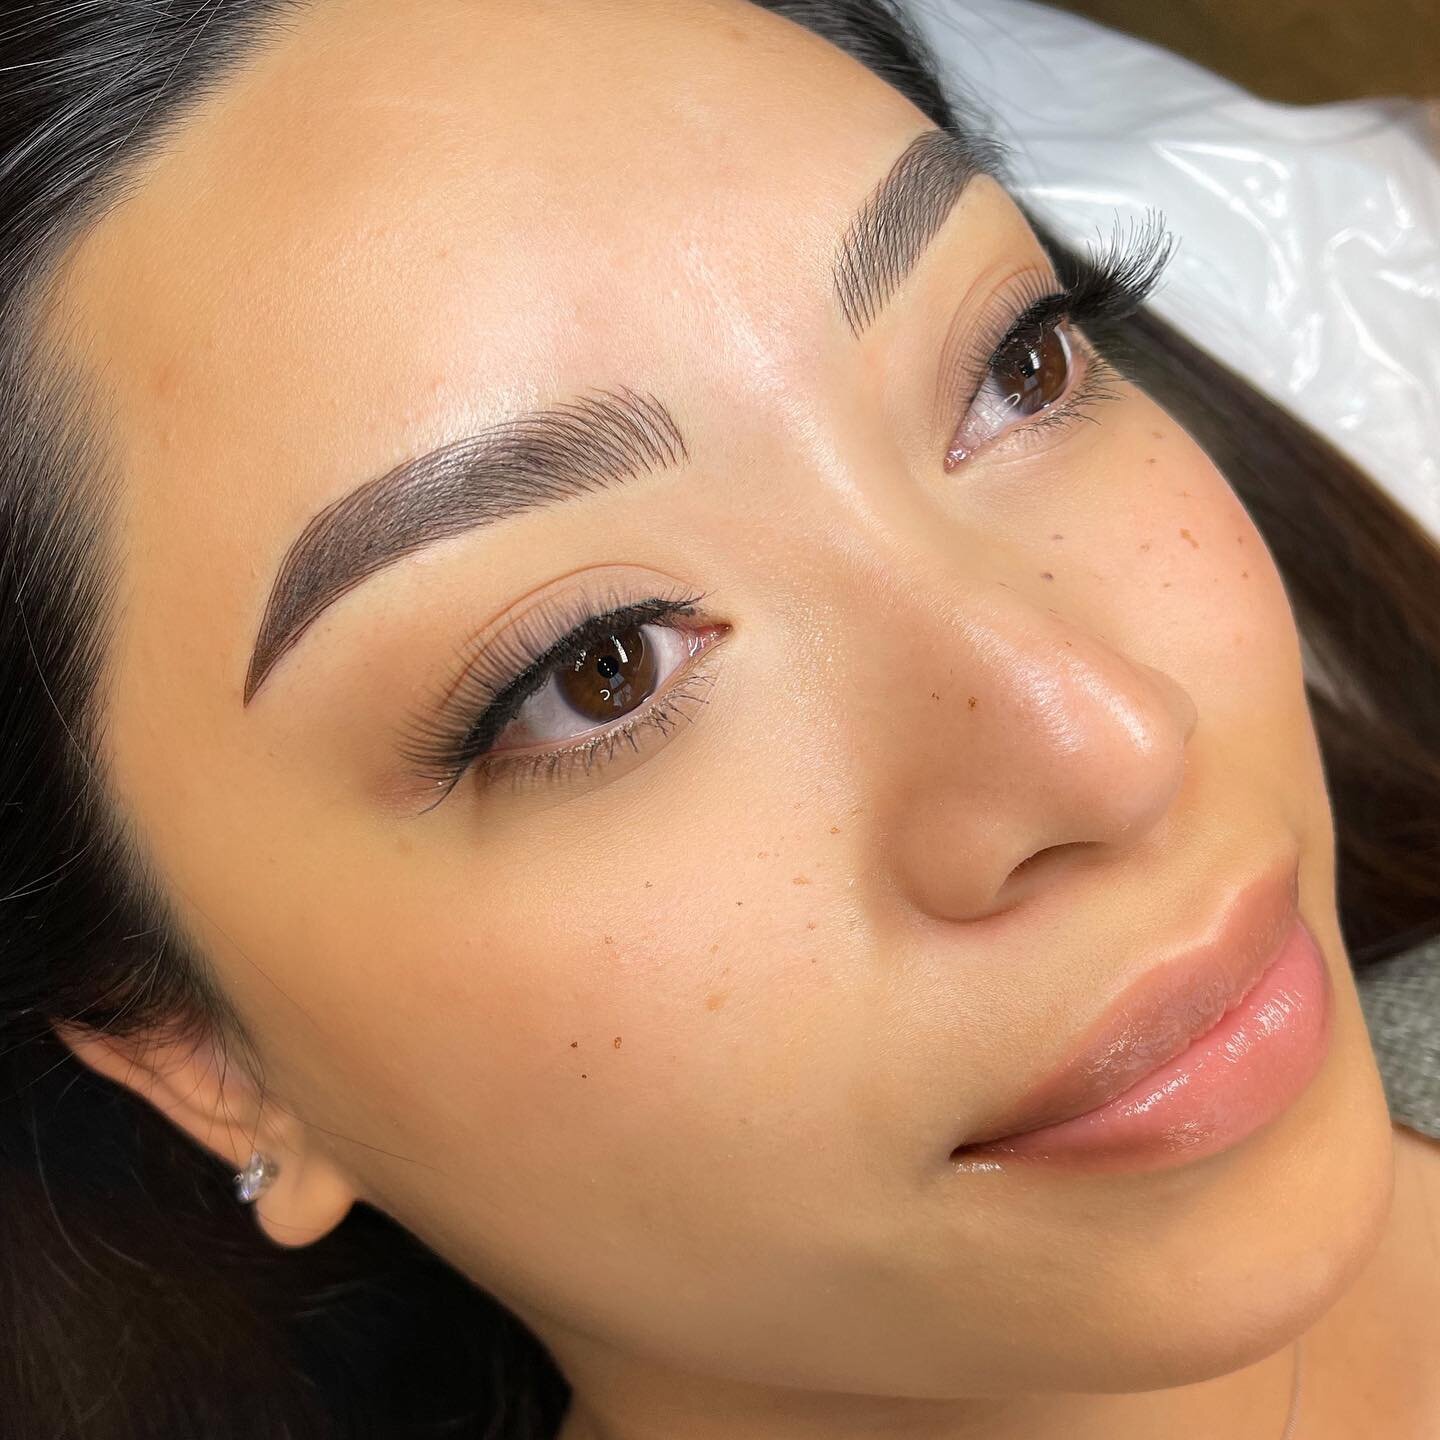 Brows and freckles 😍

The perfect duo by @permanentbeautybylili 

Using our Nano Tech Machine and Deer Dots 😍 

Available on our site now! 

✨thebrowgirls.com✨